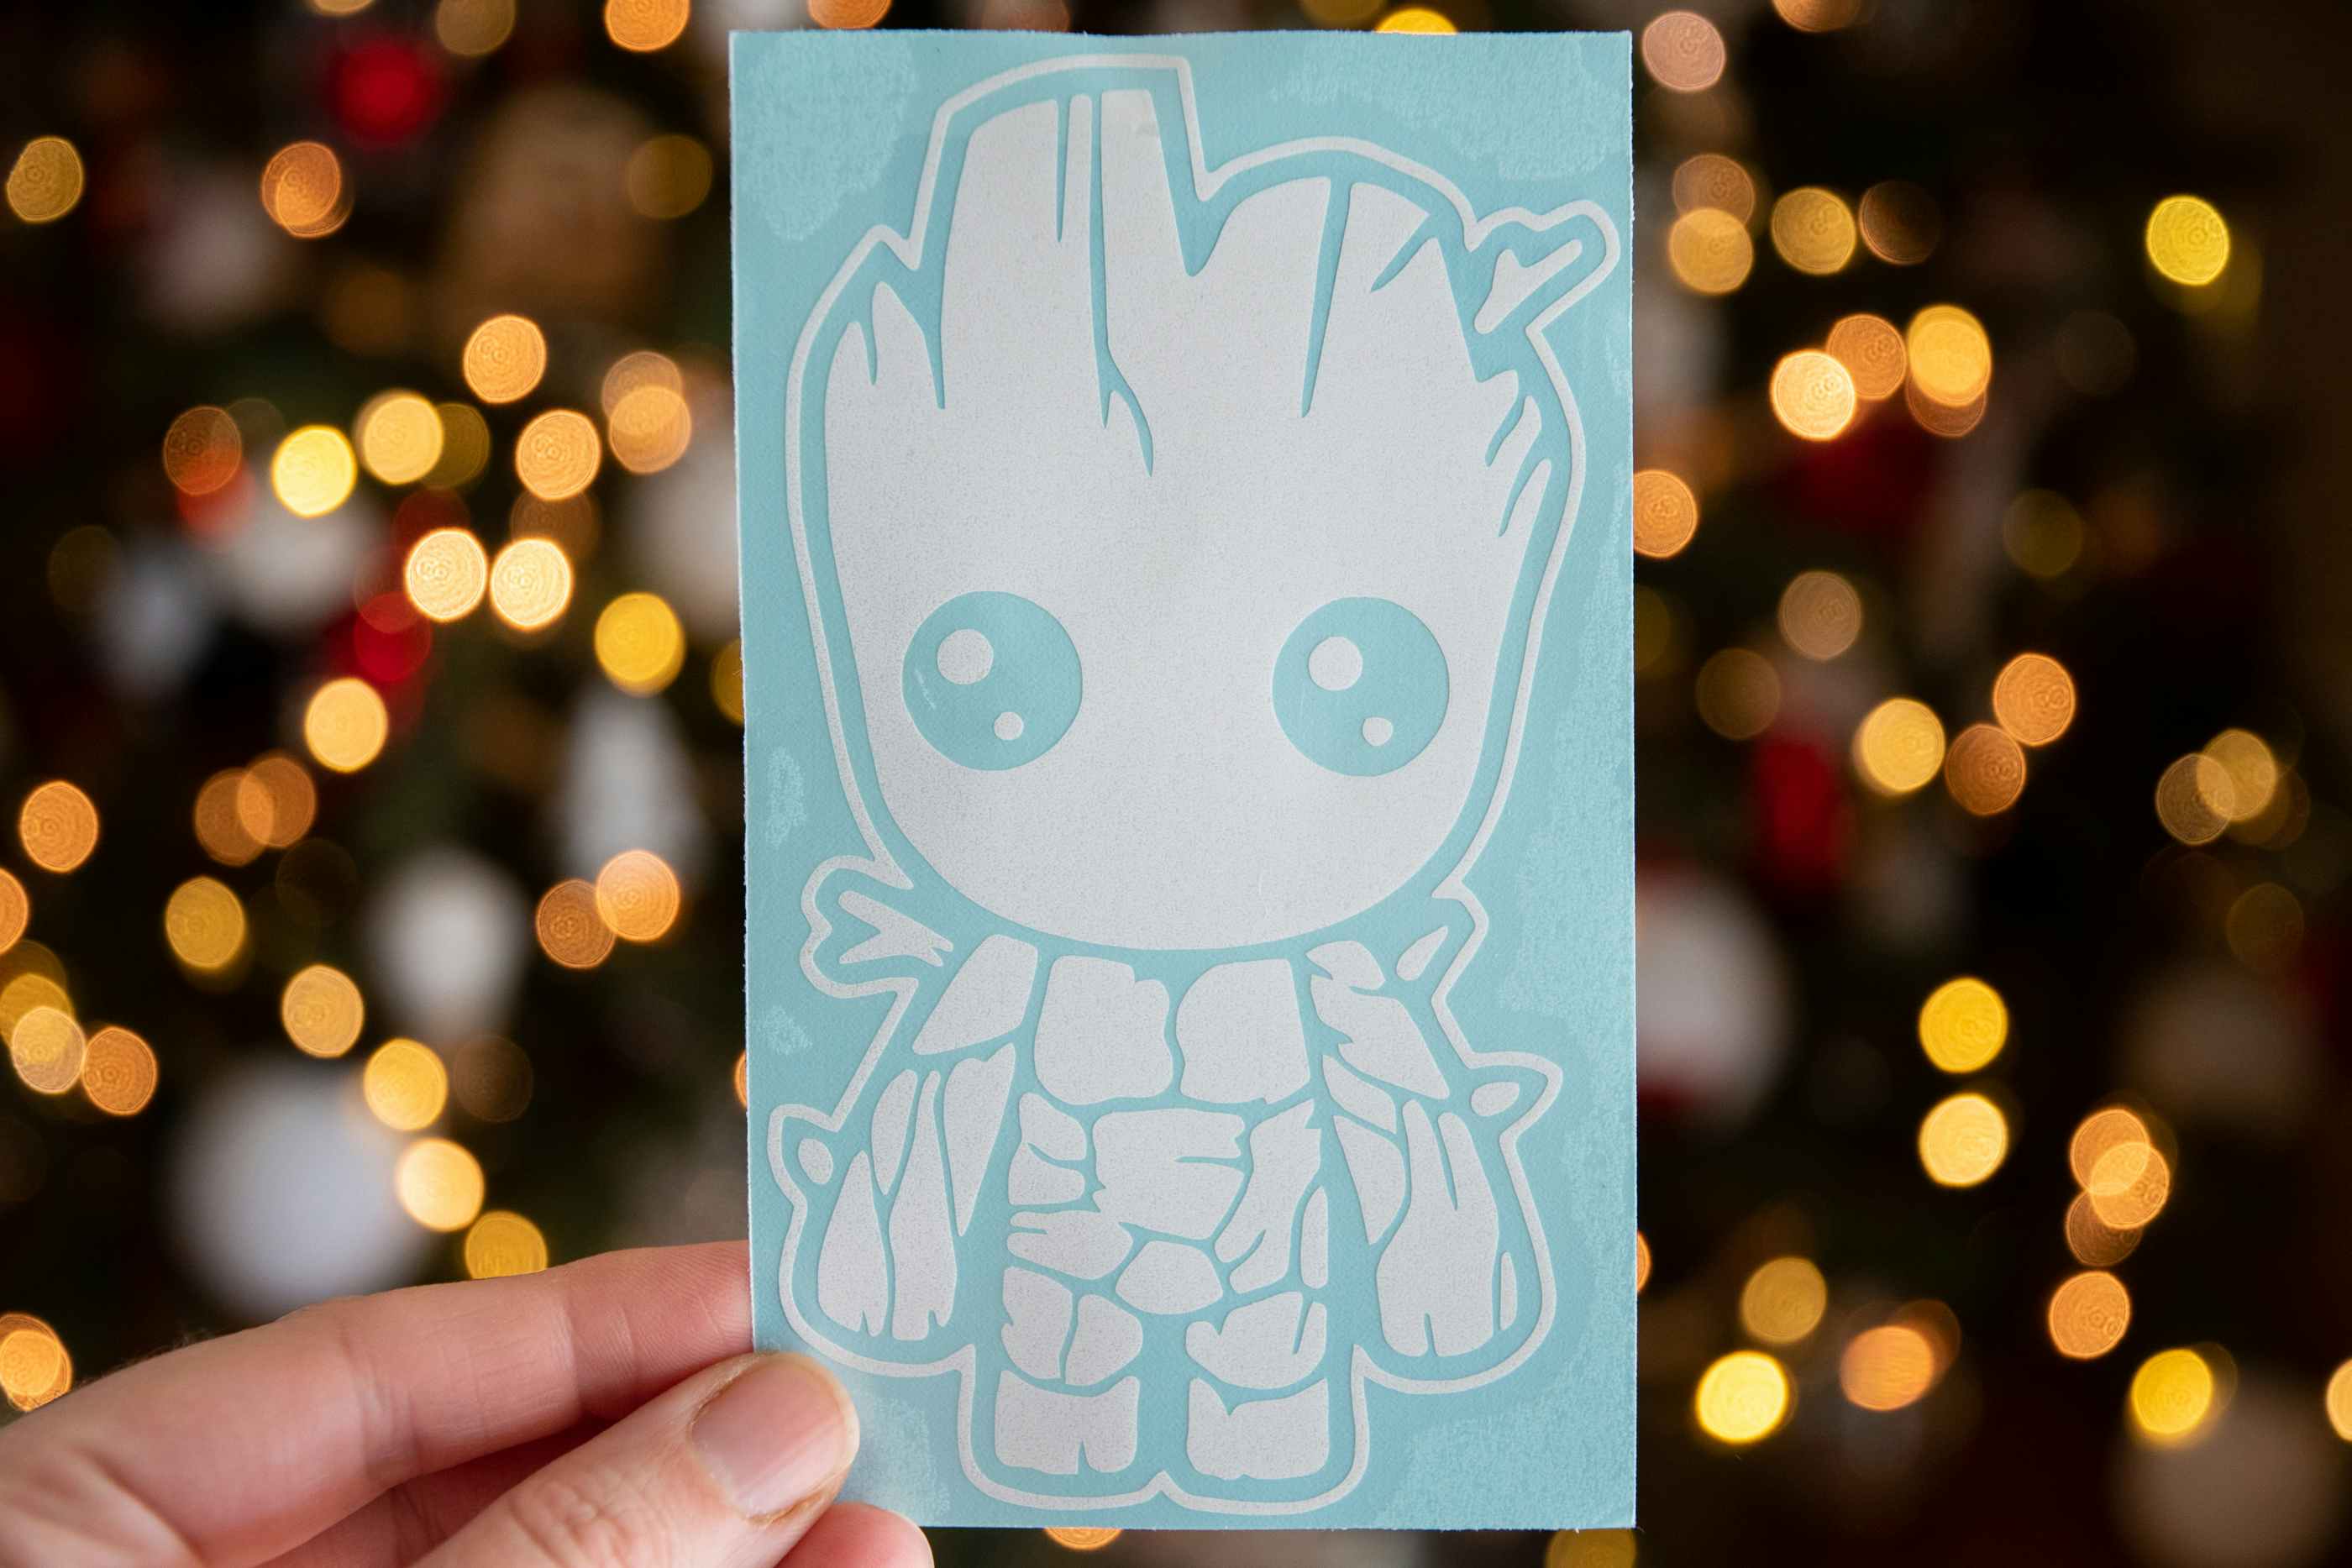 A person holding up a baby groot vinyl sticker